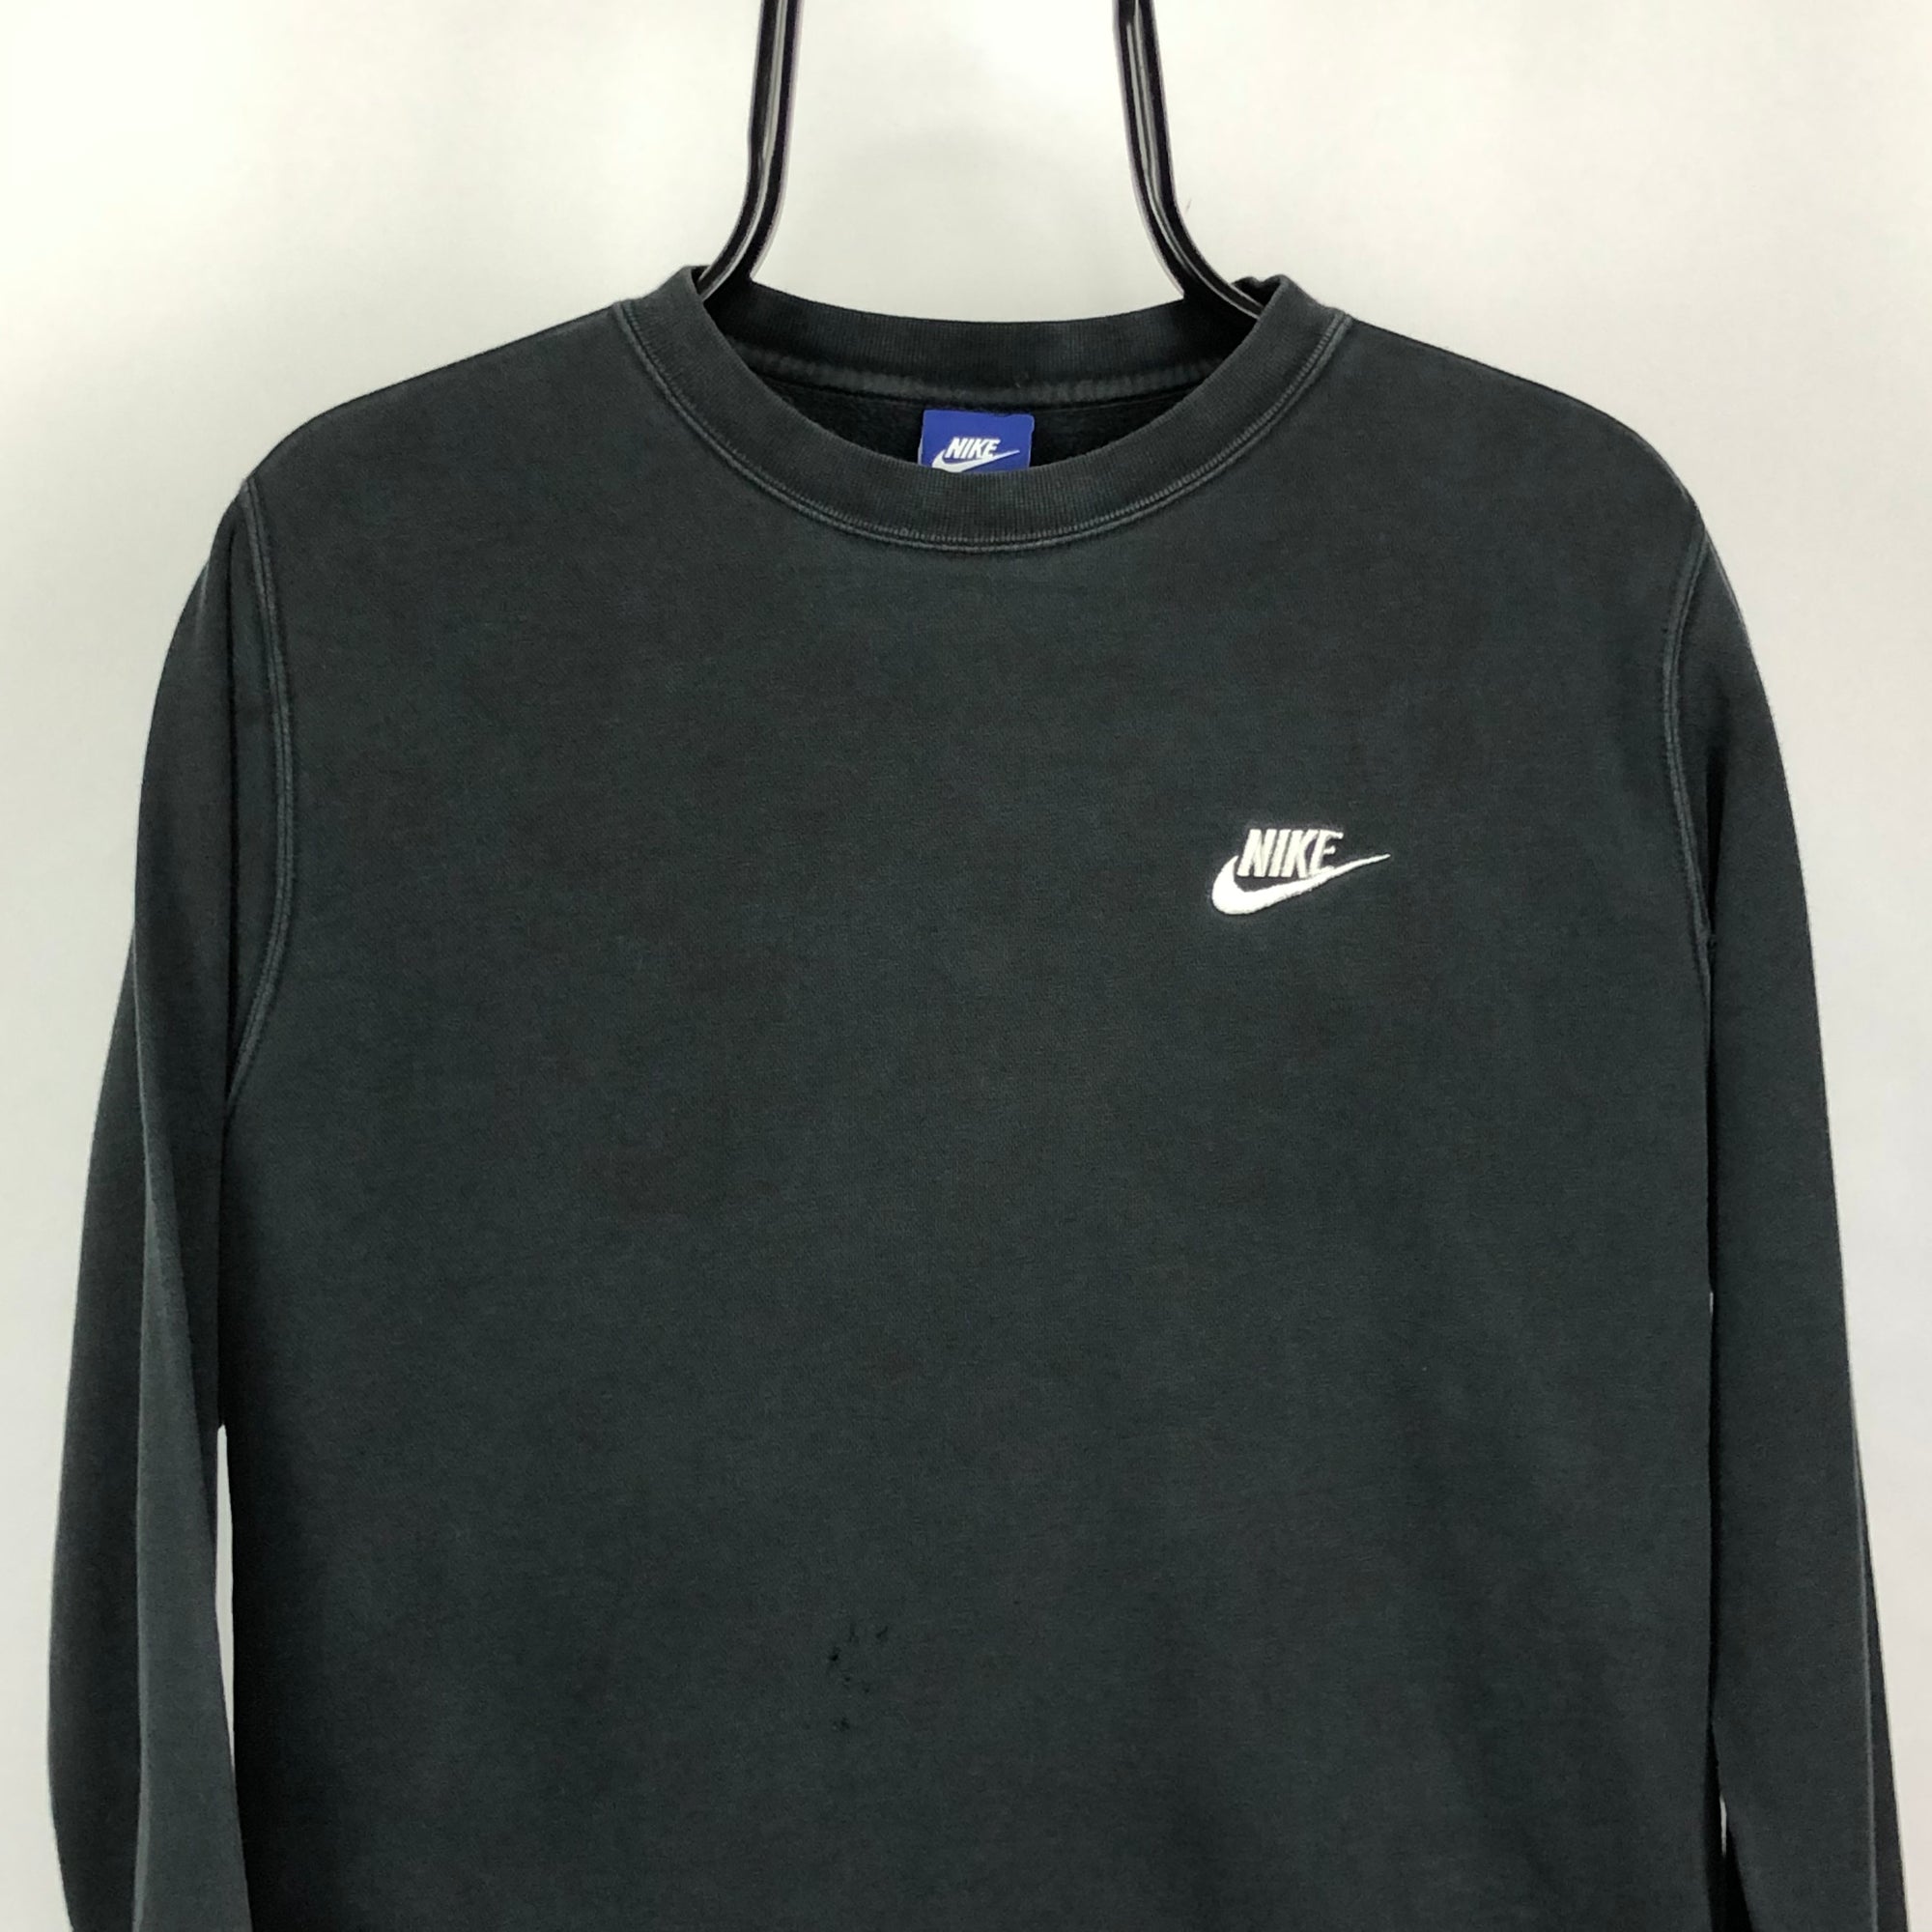 Nike Small Embroidered Spellout in Black - Men's Small/Women's Medium